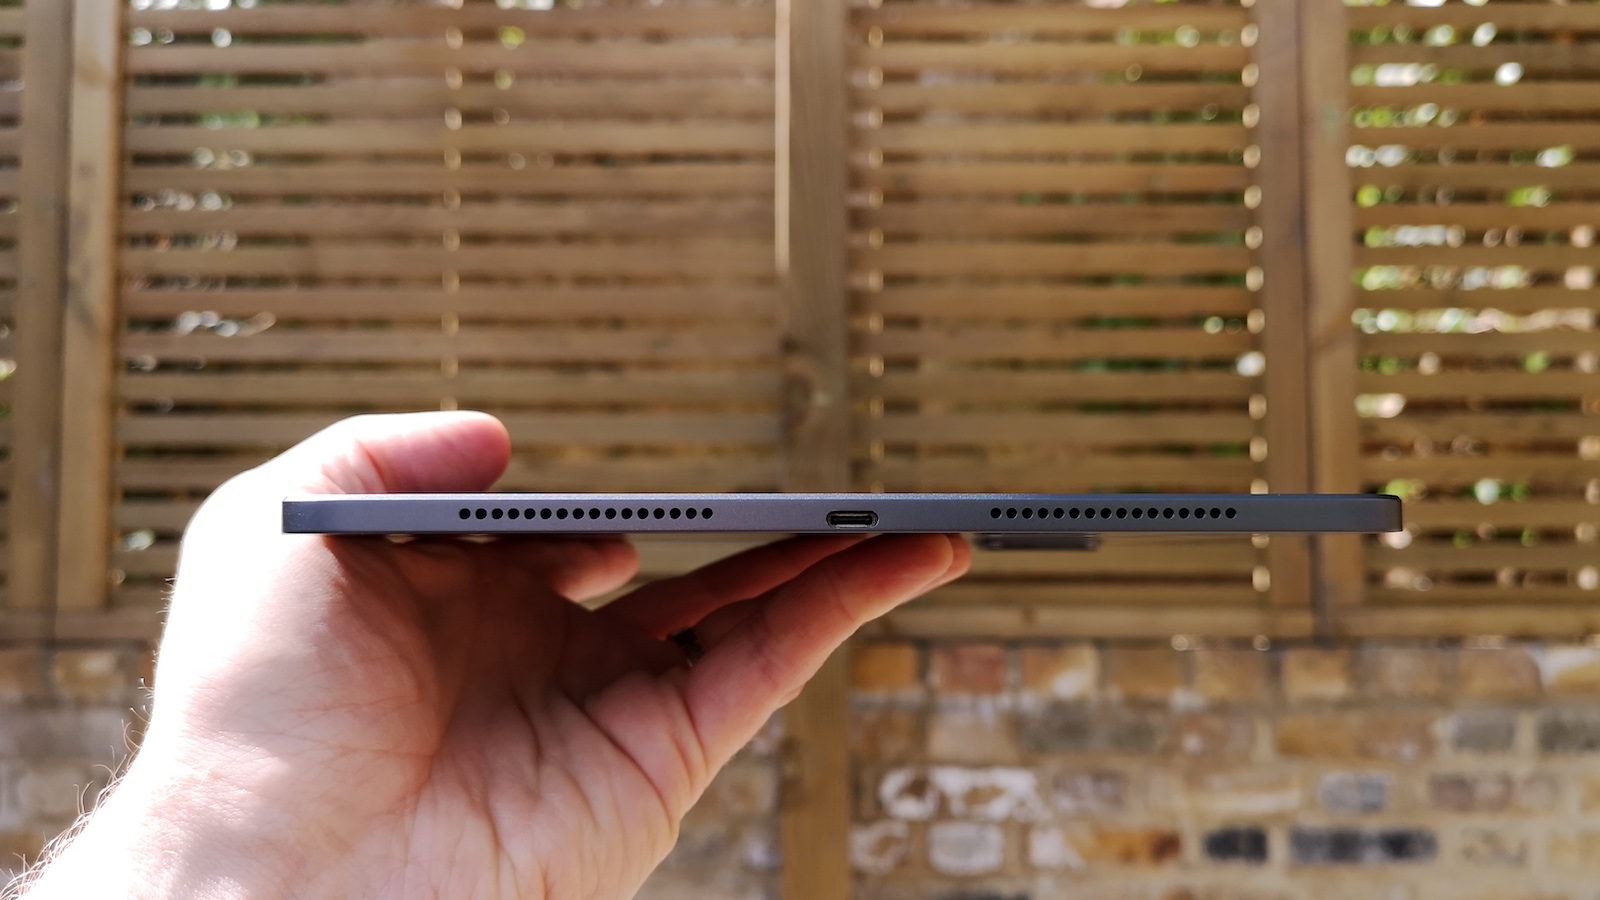 The Xiaomi Pad 6S Pro 12.4 is a versatile tablet with neat tricks up its sleeve